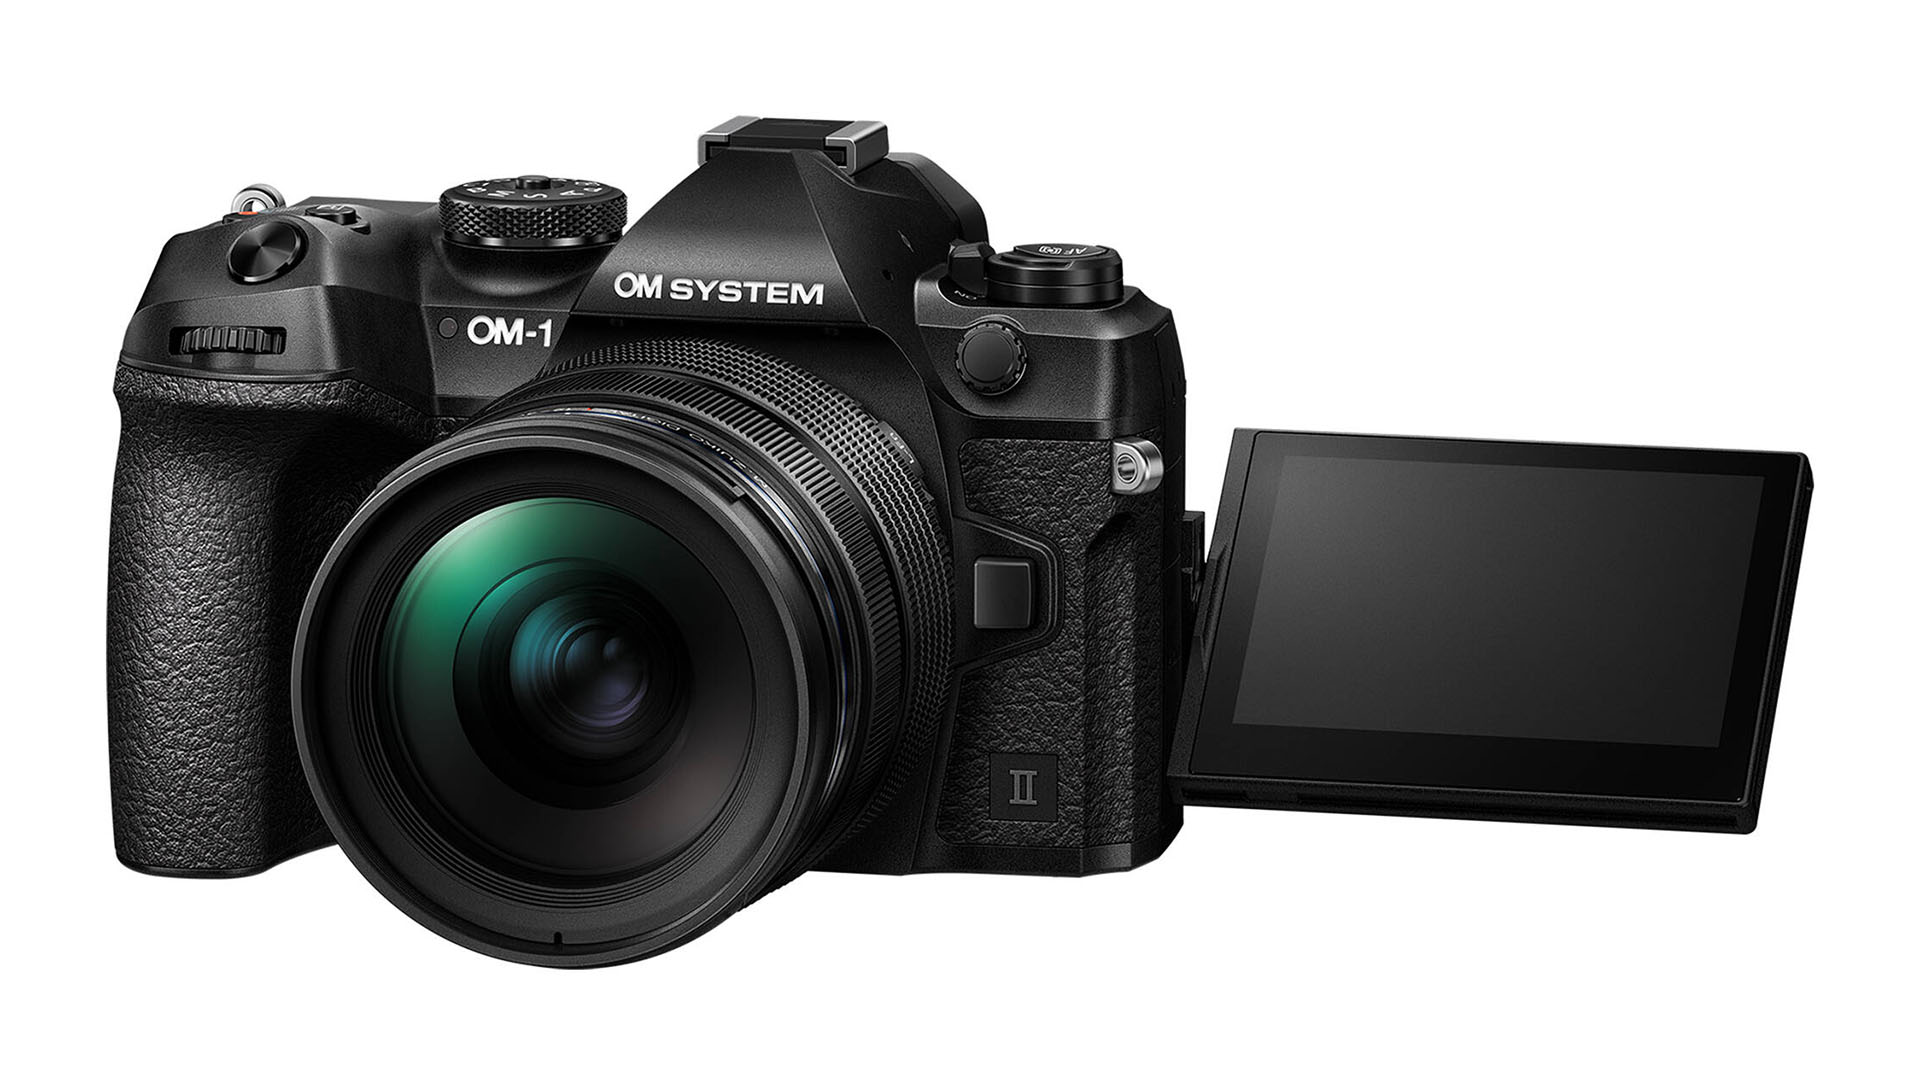 The OM System OM-1 shows computational tricks are the future of mirrorless  cameras